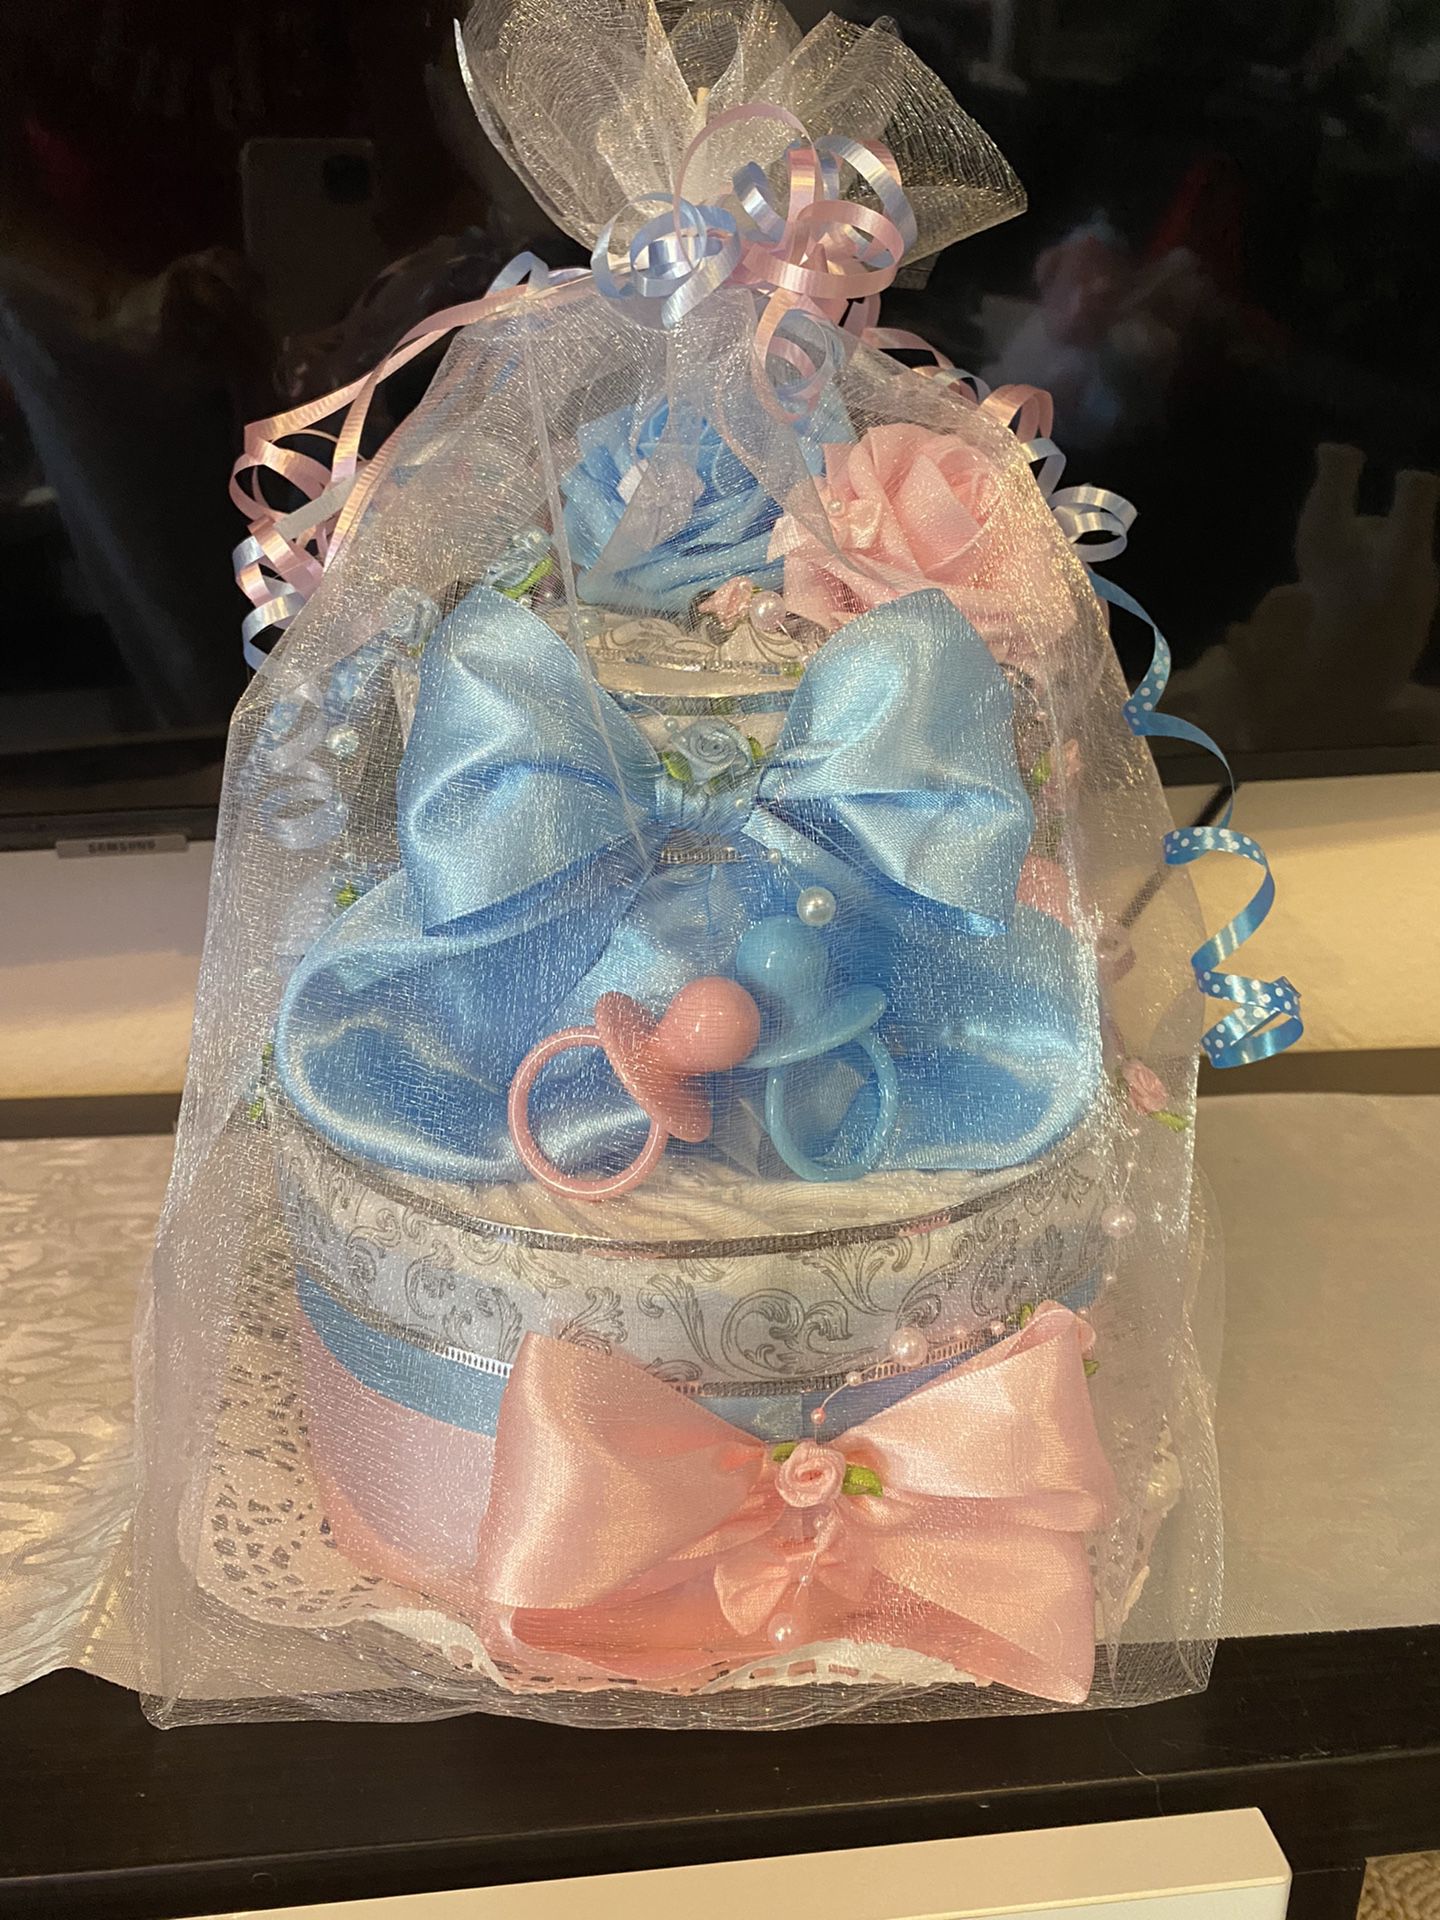 Diapers Cake For A Gender Reveals And Gift